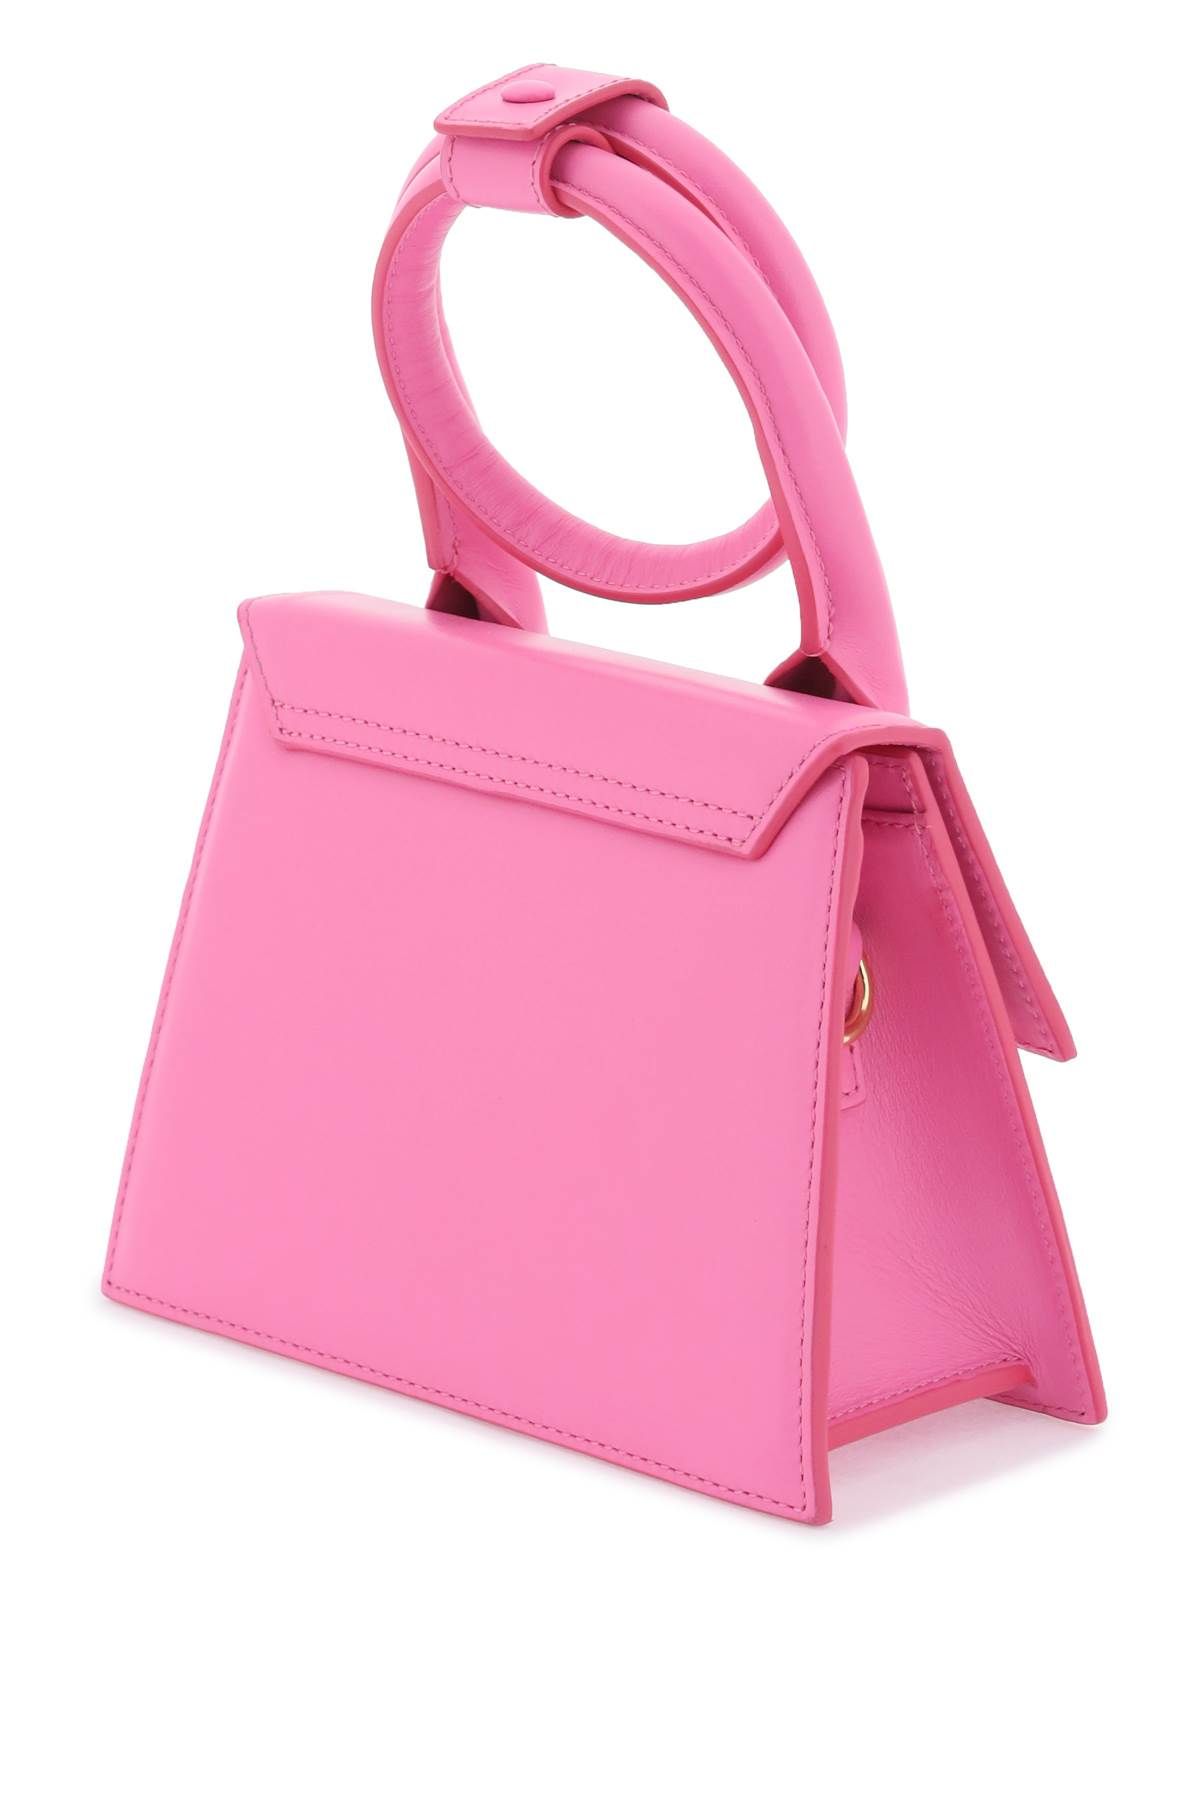 Shop Jacquemus Le Chiquito Noeud Bag In Pink